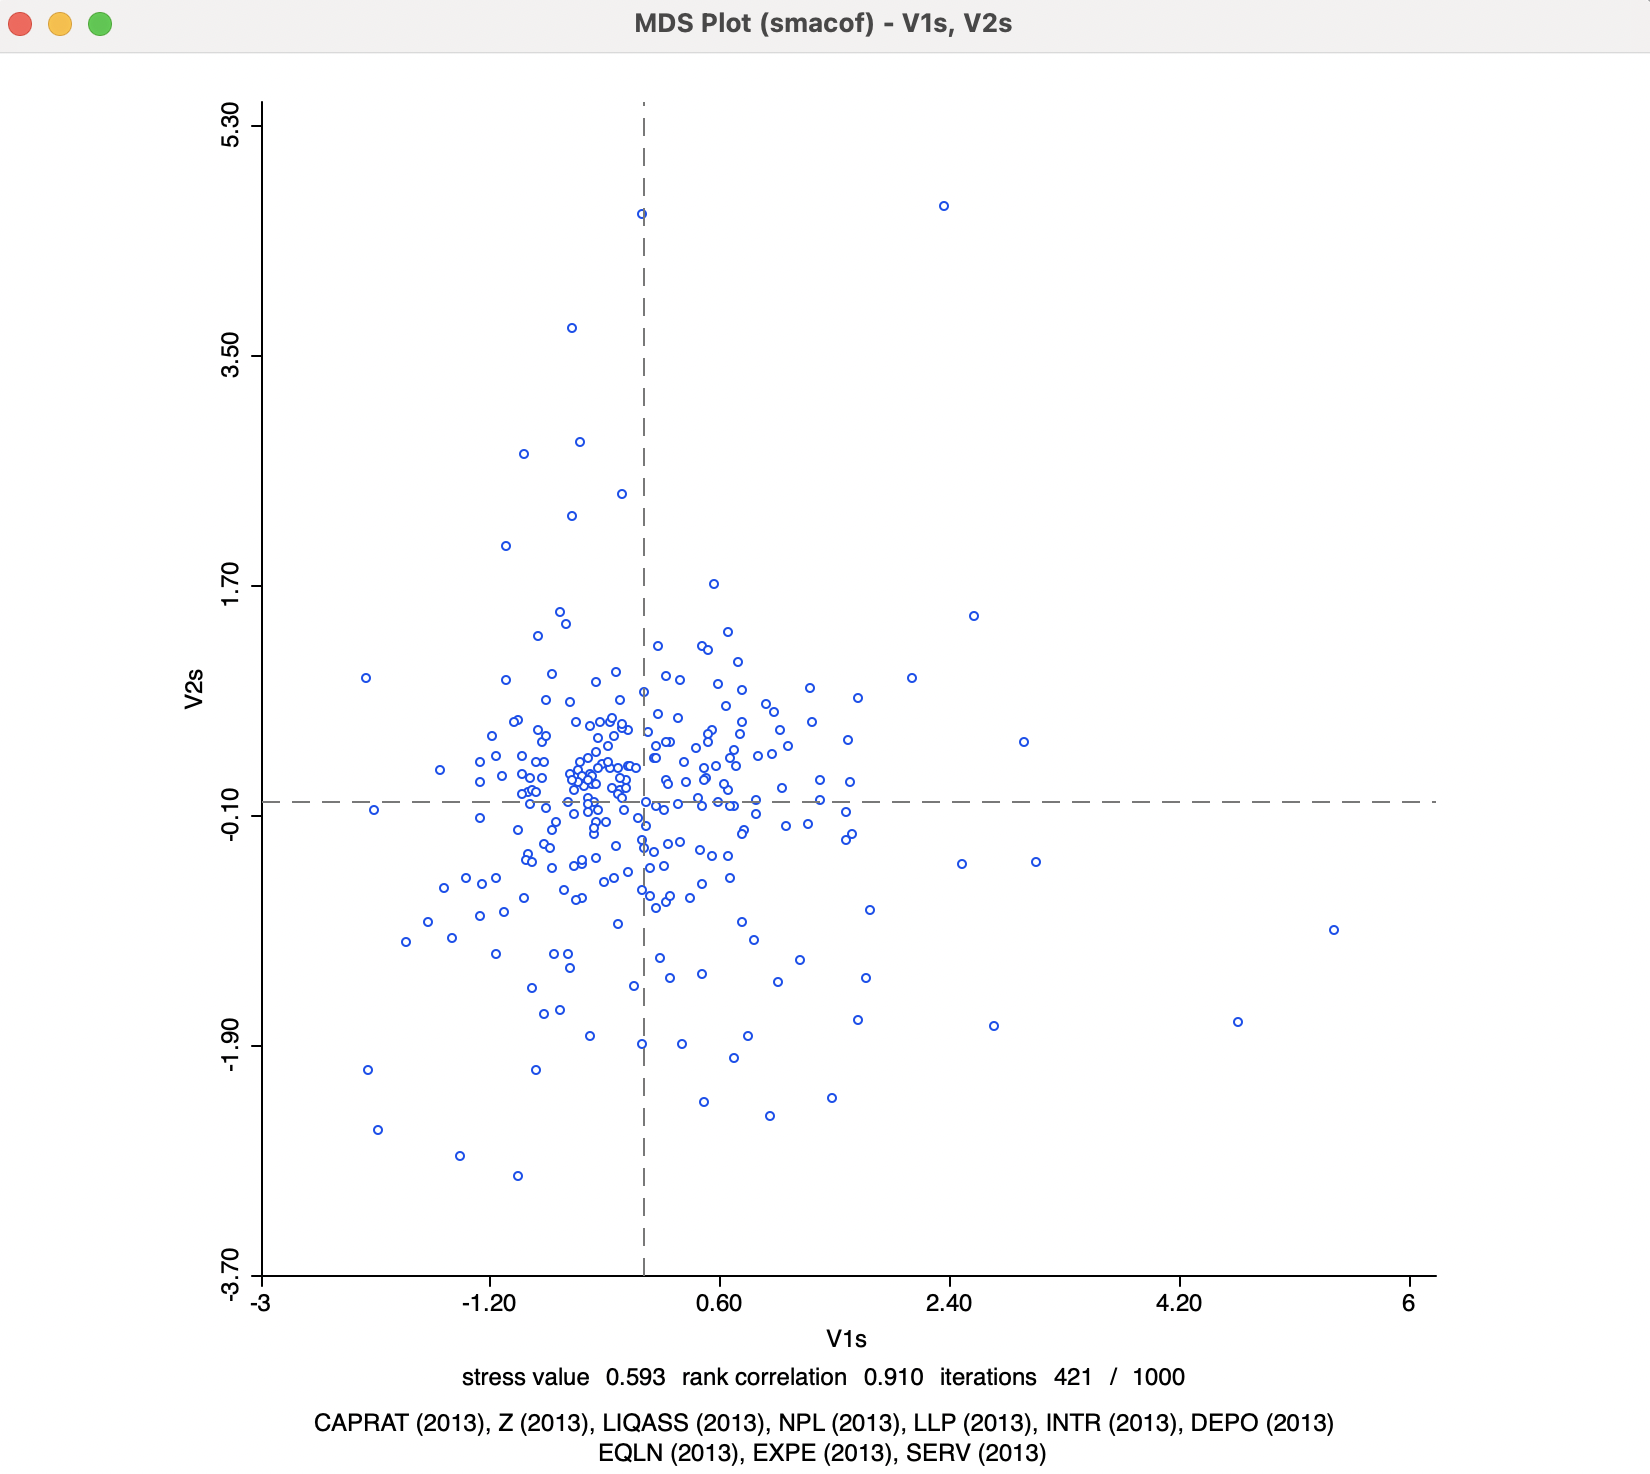 MDS Scatter Plot for SMACOF